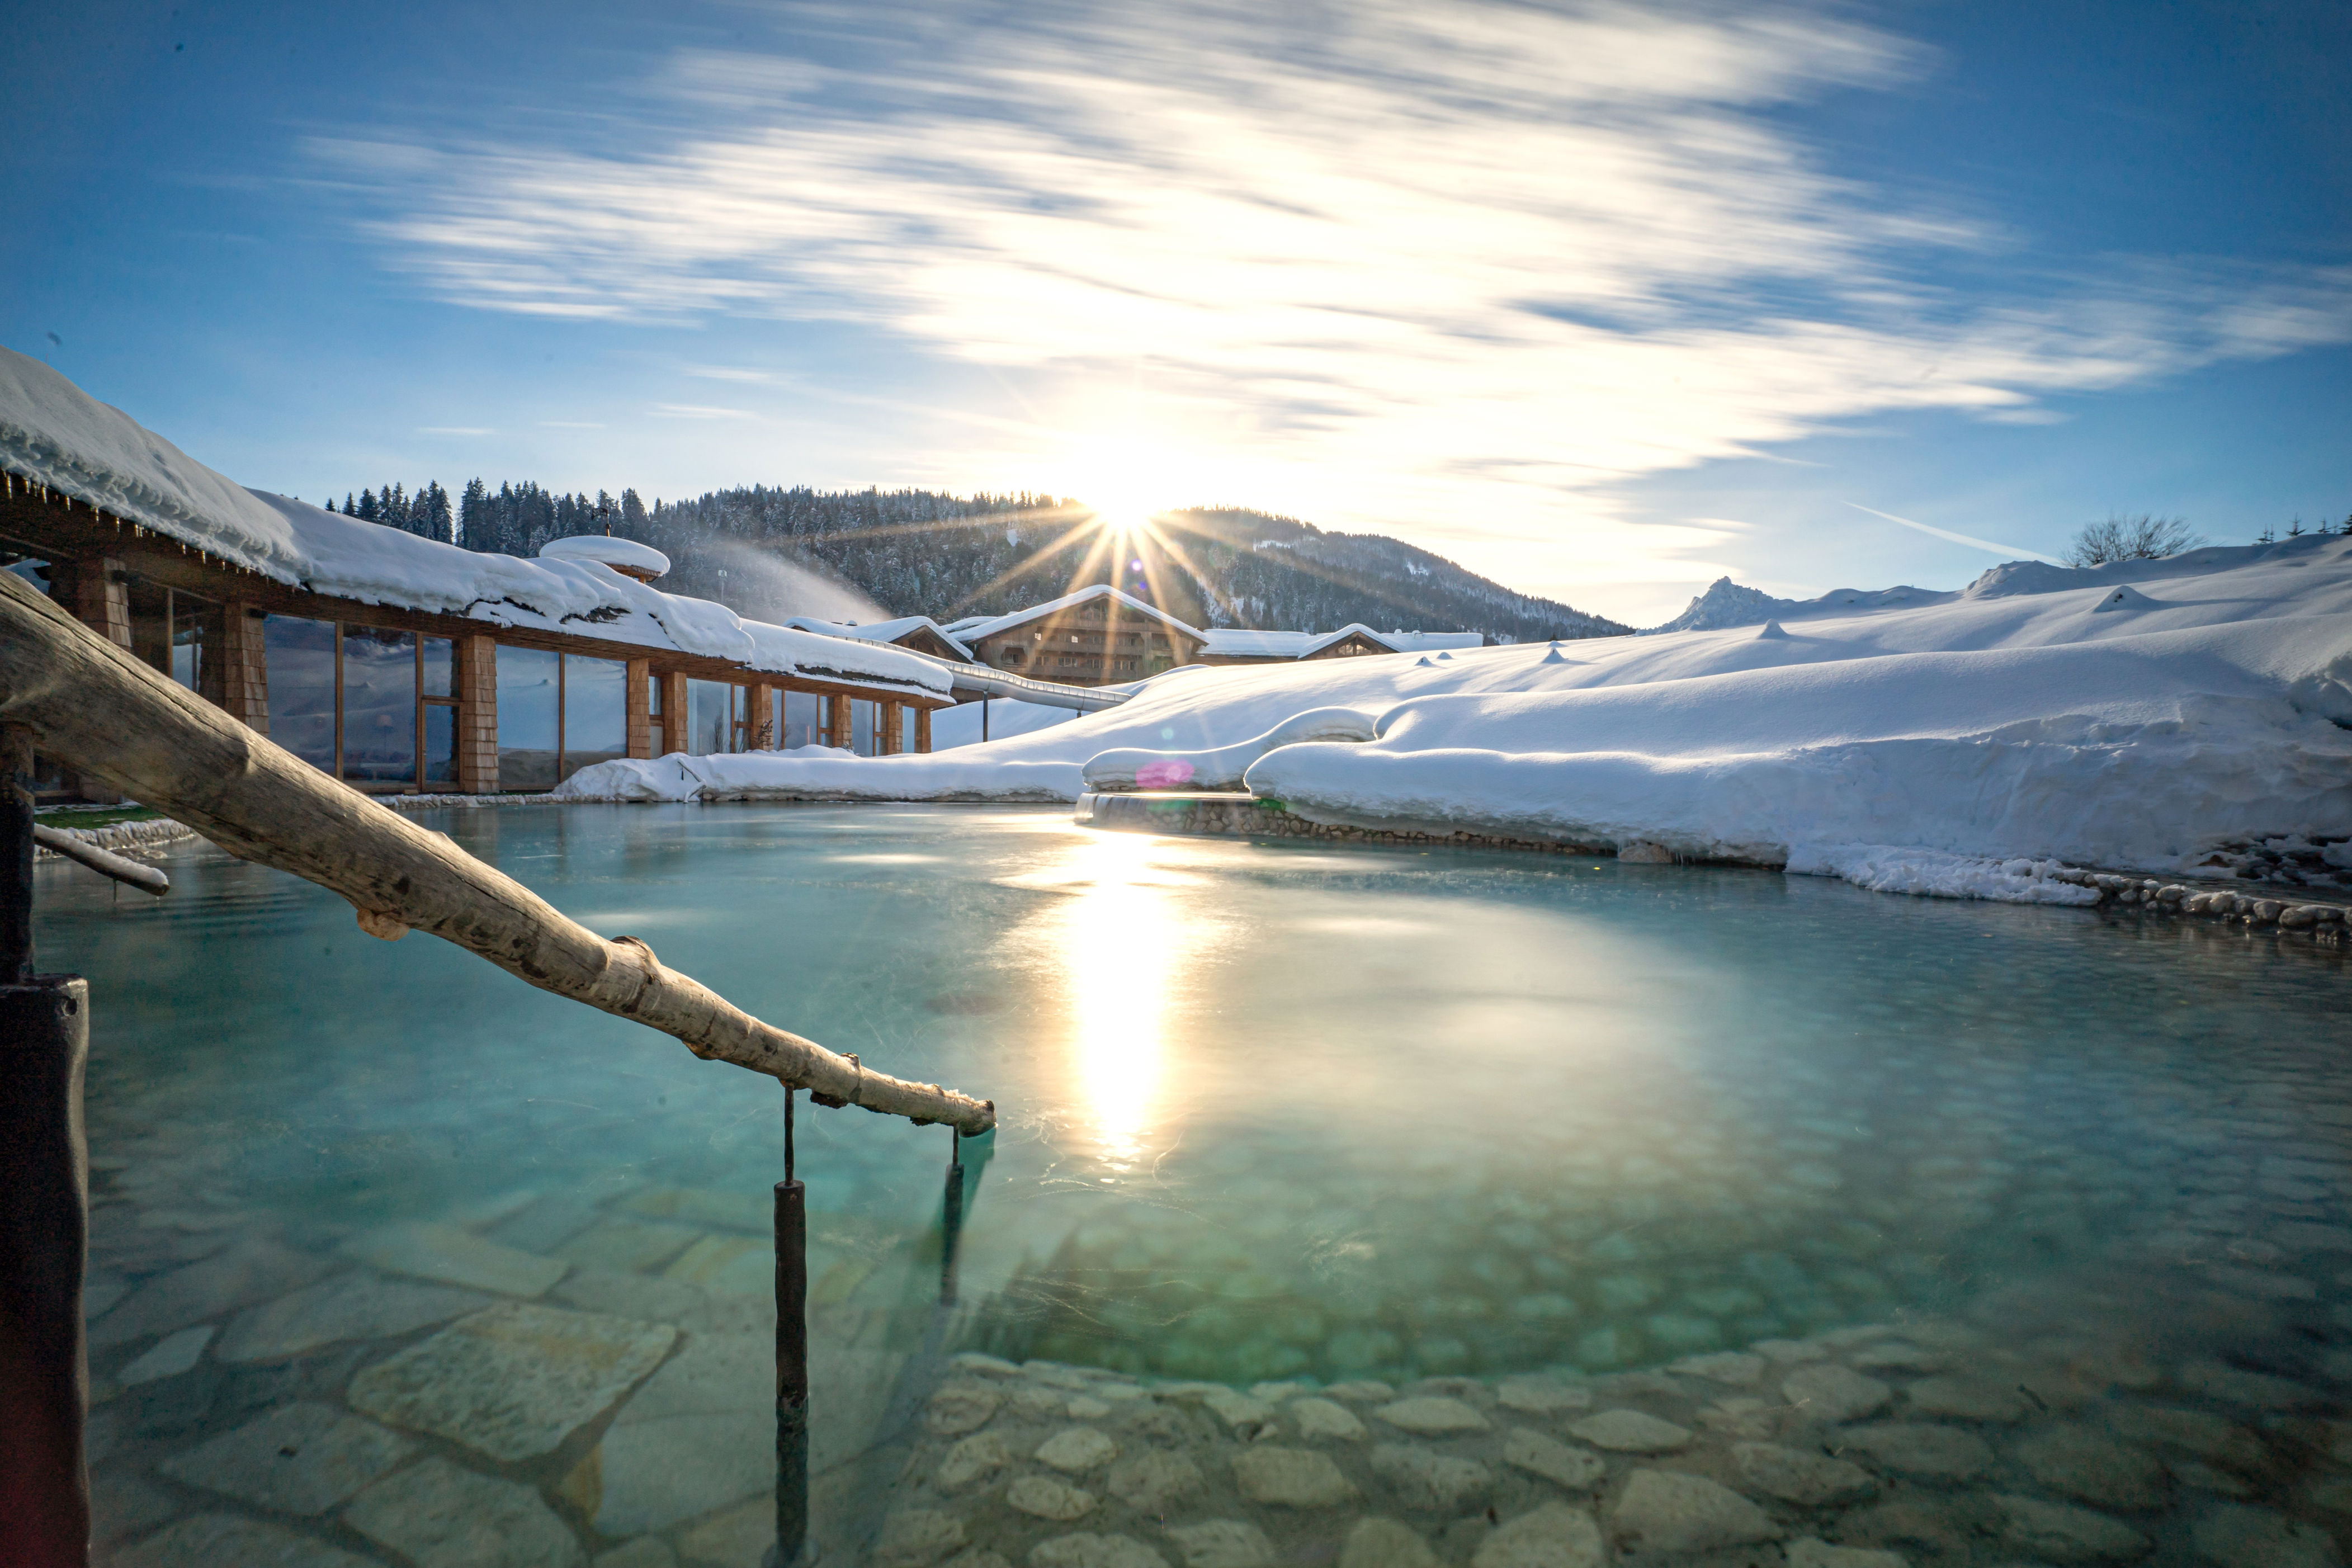 <p>True to the “green” mission implied by its name, <a href="https://www.stanglwirt.com/en/">Stanglwirt</a>’s 130,000-square-foot spa is powered by a heat pump that harnesses the energy of the local mountain water. Five saunas, three steam baths, and a colossal saltwater pool with views of the Wilder Kaiser mountain range are available for guests seeking some restorative hydrotherapy, while 14 tennis courts, a riding school complete with Lipizzaner horses, and prime nearby skiing property might appeal to those seeking a more active wellness experience. Nutritional wellness is also emphasized at the resort via fresh culinary offerings from its 160-acre organic farm.</p> <div class="callout"><p><a href="https://booking.stanglwirt.com/?activeBookingEngine=KBE&propertyCode=S002908&skd-checkin=2024-02-27&skd-checkout=2024-02-28&skd-property-code=S002908" title="Book now at Stanglwirt.com">Book now at Stanglwirt.com</a></p> </div><p>Sign up for our newsletter to get the latest in design, decorating, celebrity style, shopping, and more.</p><a href="https://www.architecturaldigest.com/newsletter/subscribe?sourceCode=msnsend">Sign Up Now</a>